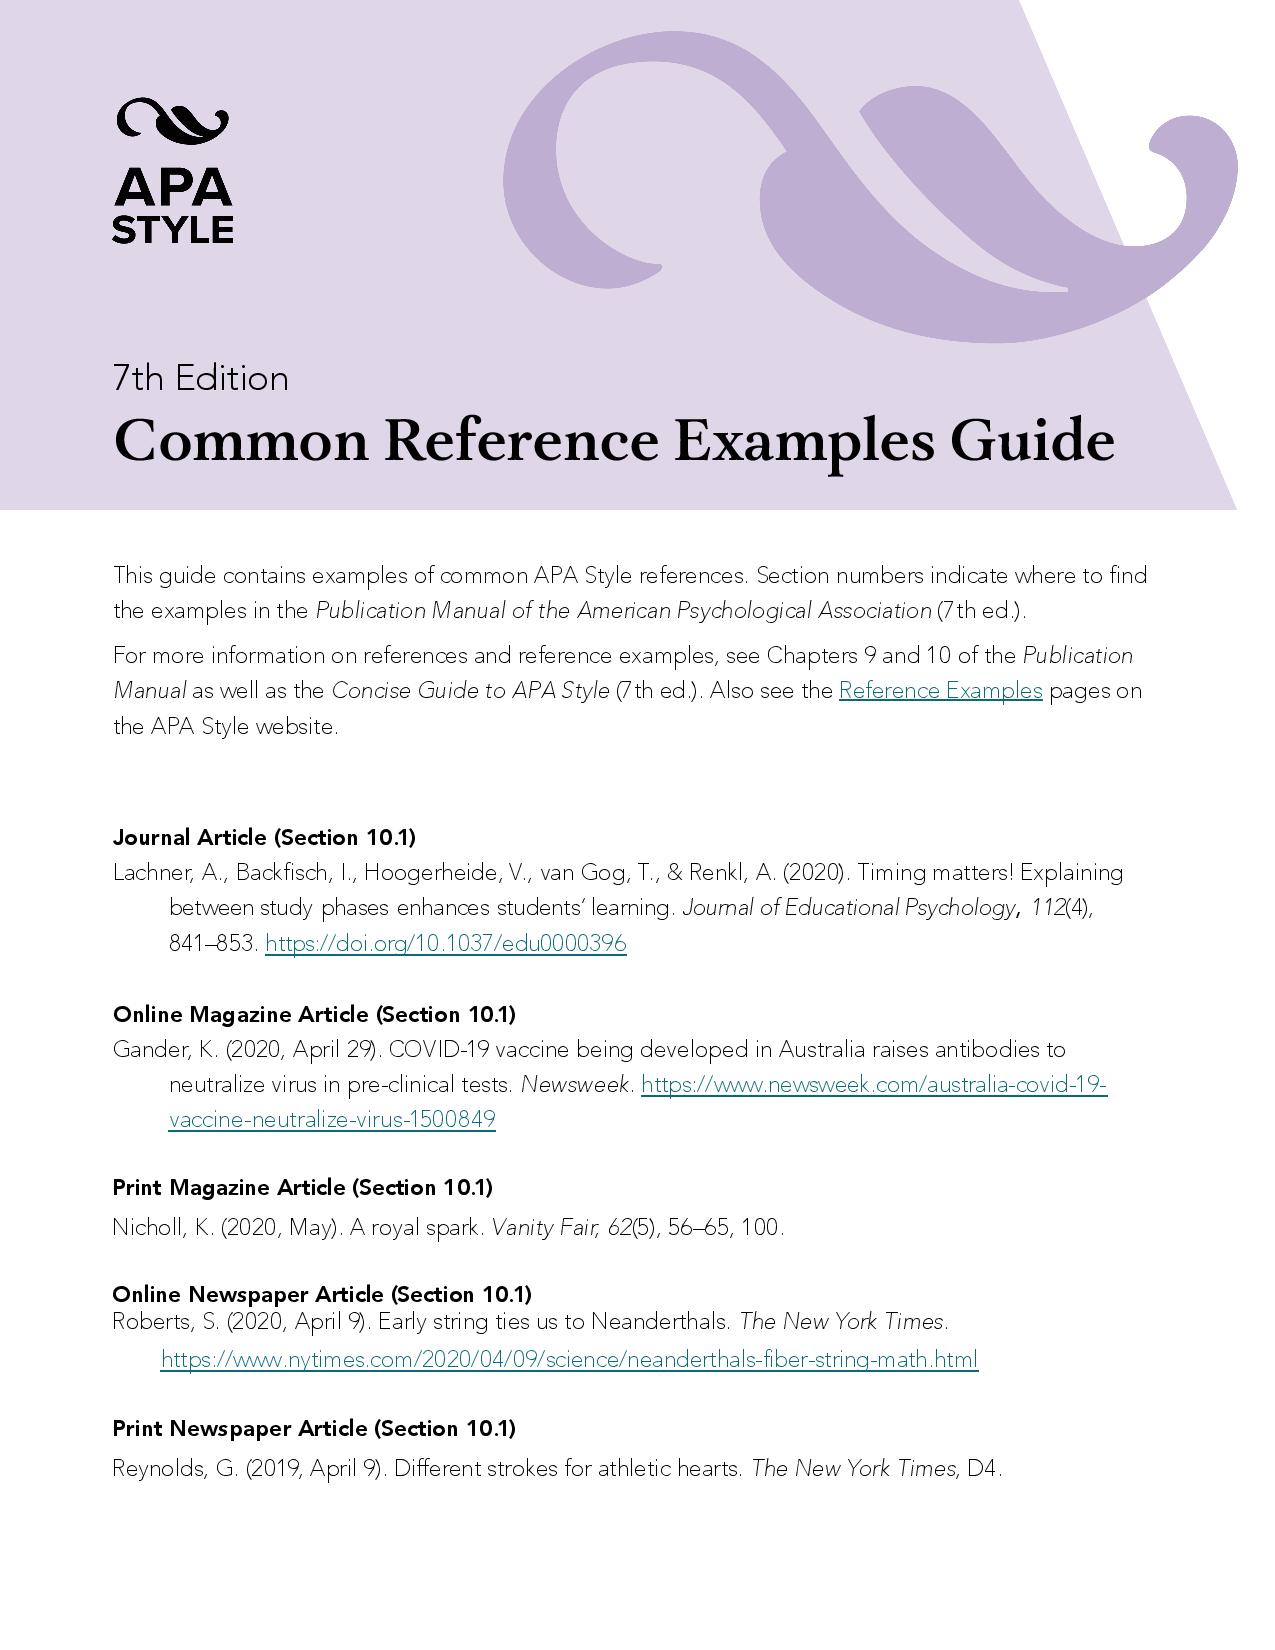 APA 7th edition common reference examples guide